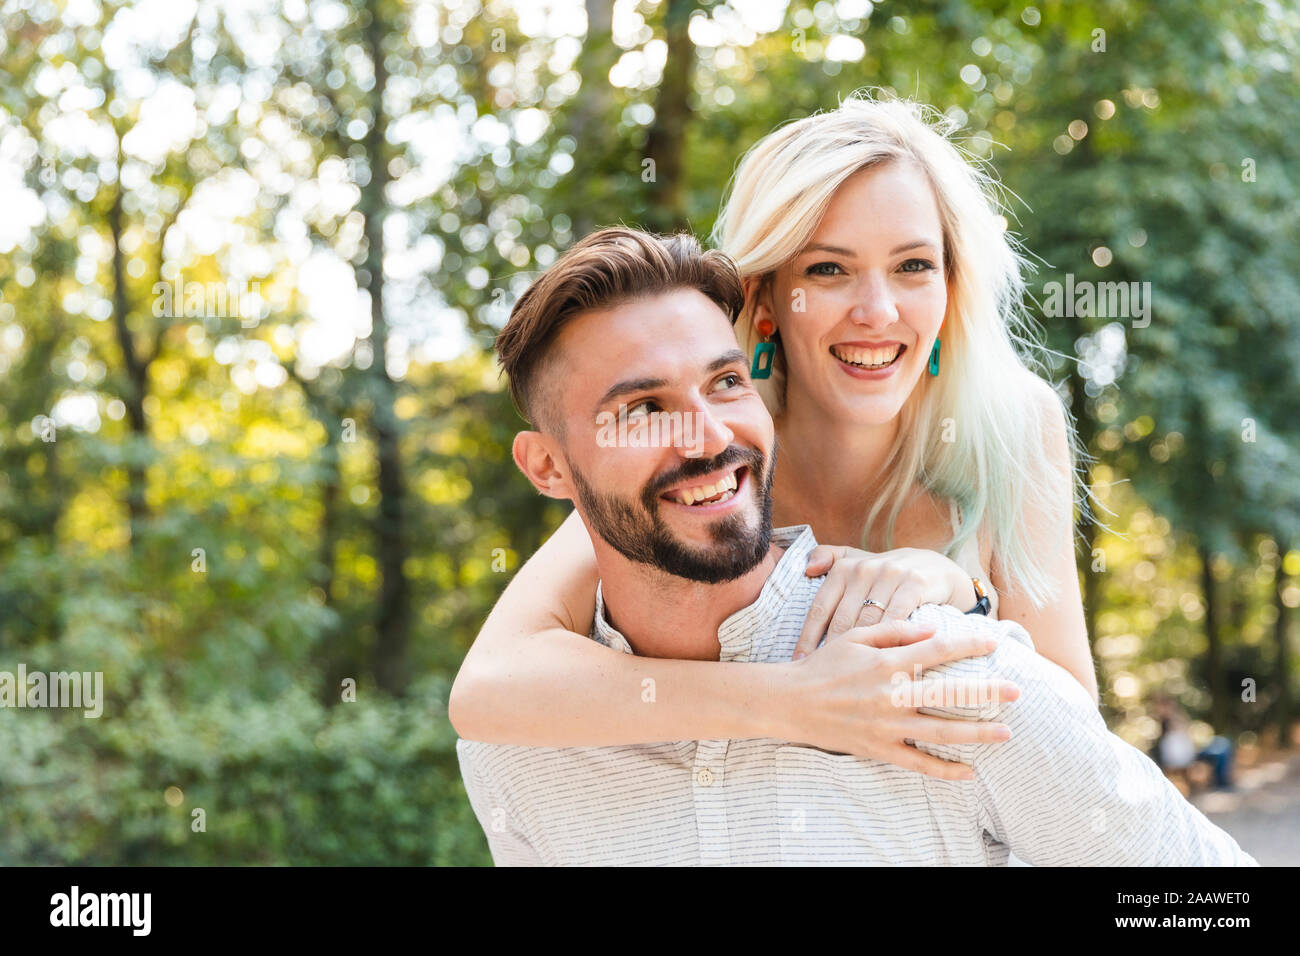 Portrait of happy young man giving his girlfriend a piggyback ride Banque D'Images